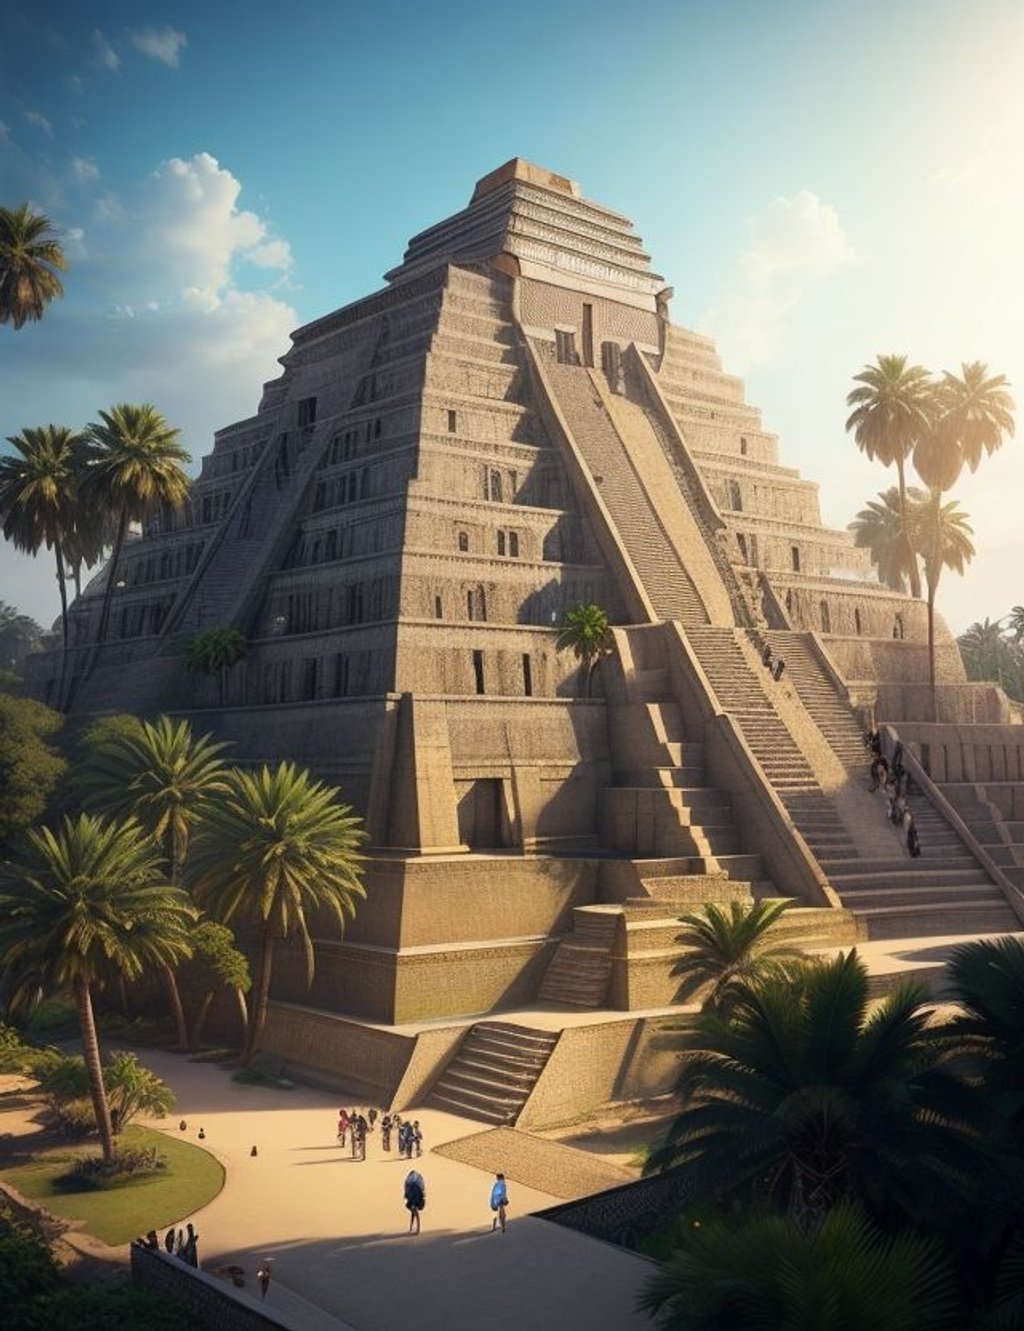 Prompt: A majestic view of the Great Ziggurat of Ur, with people walking up its ancient steps, surrounded by lush palm trees and a vibrant sky. Rendered in realistic detail with Unreal Engine.